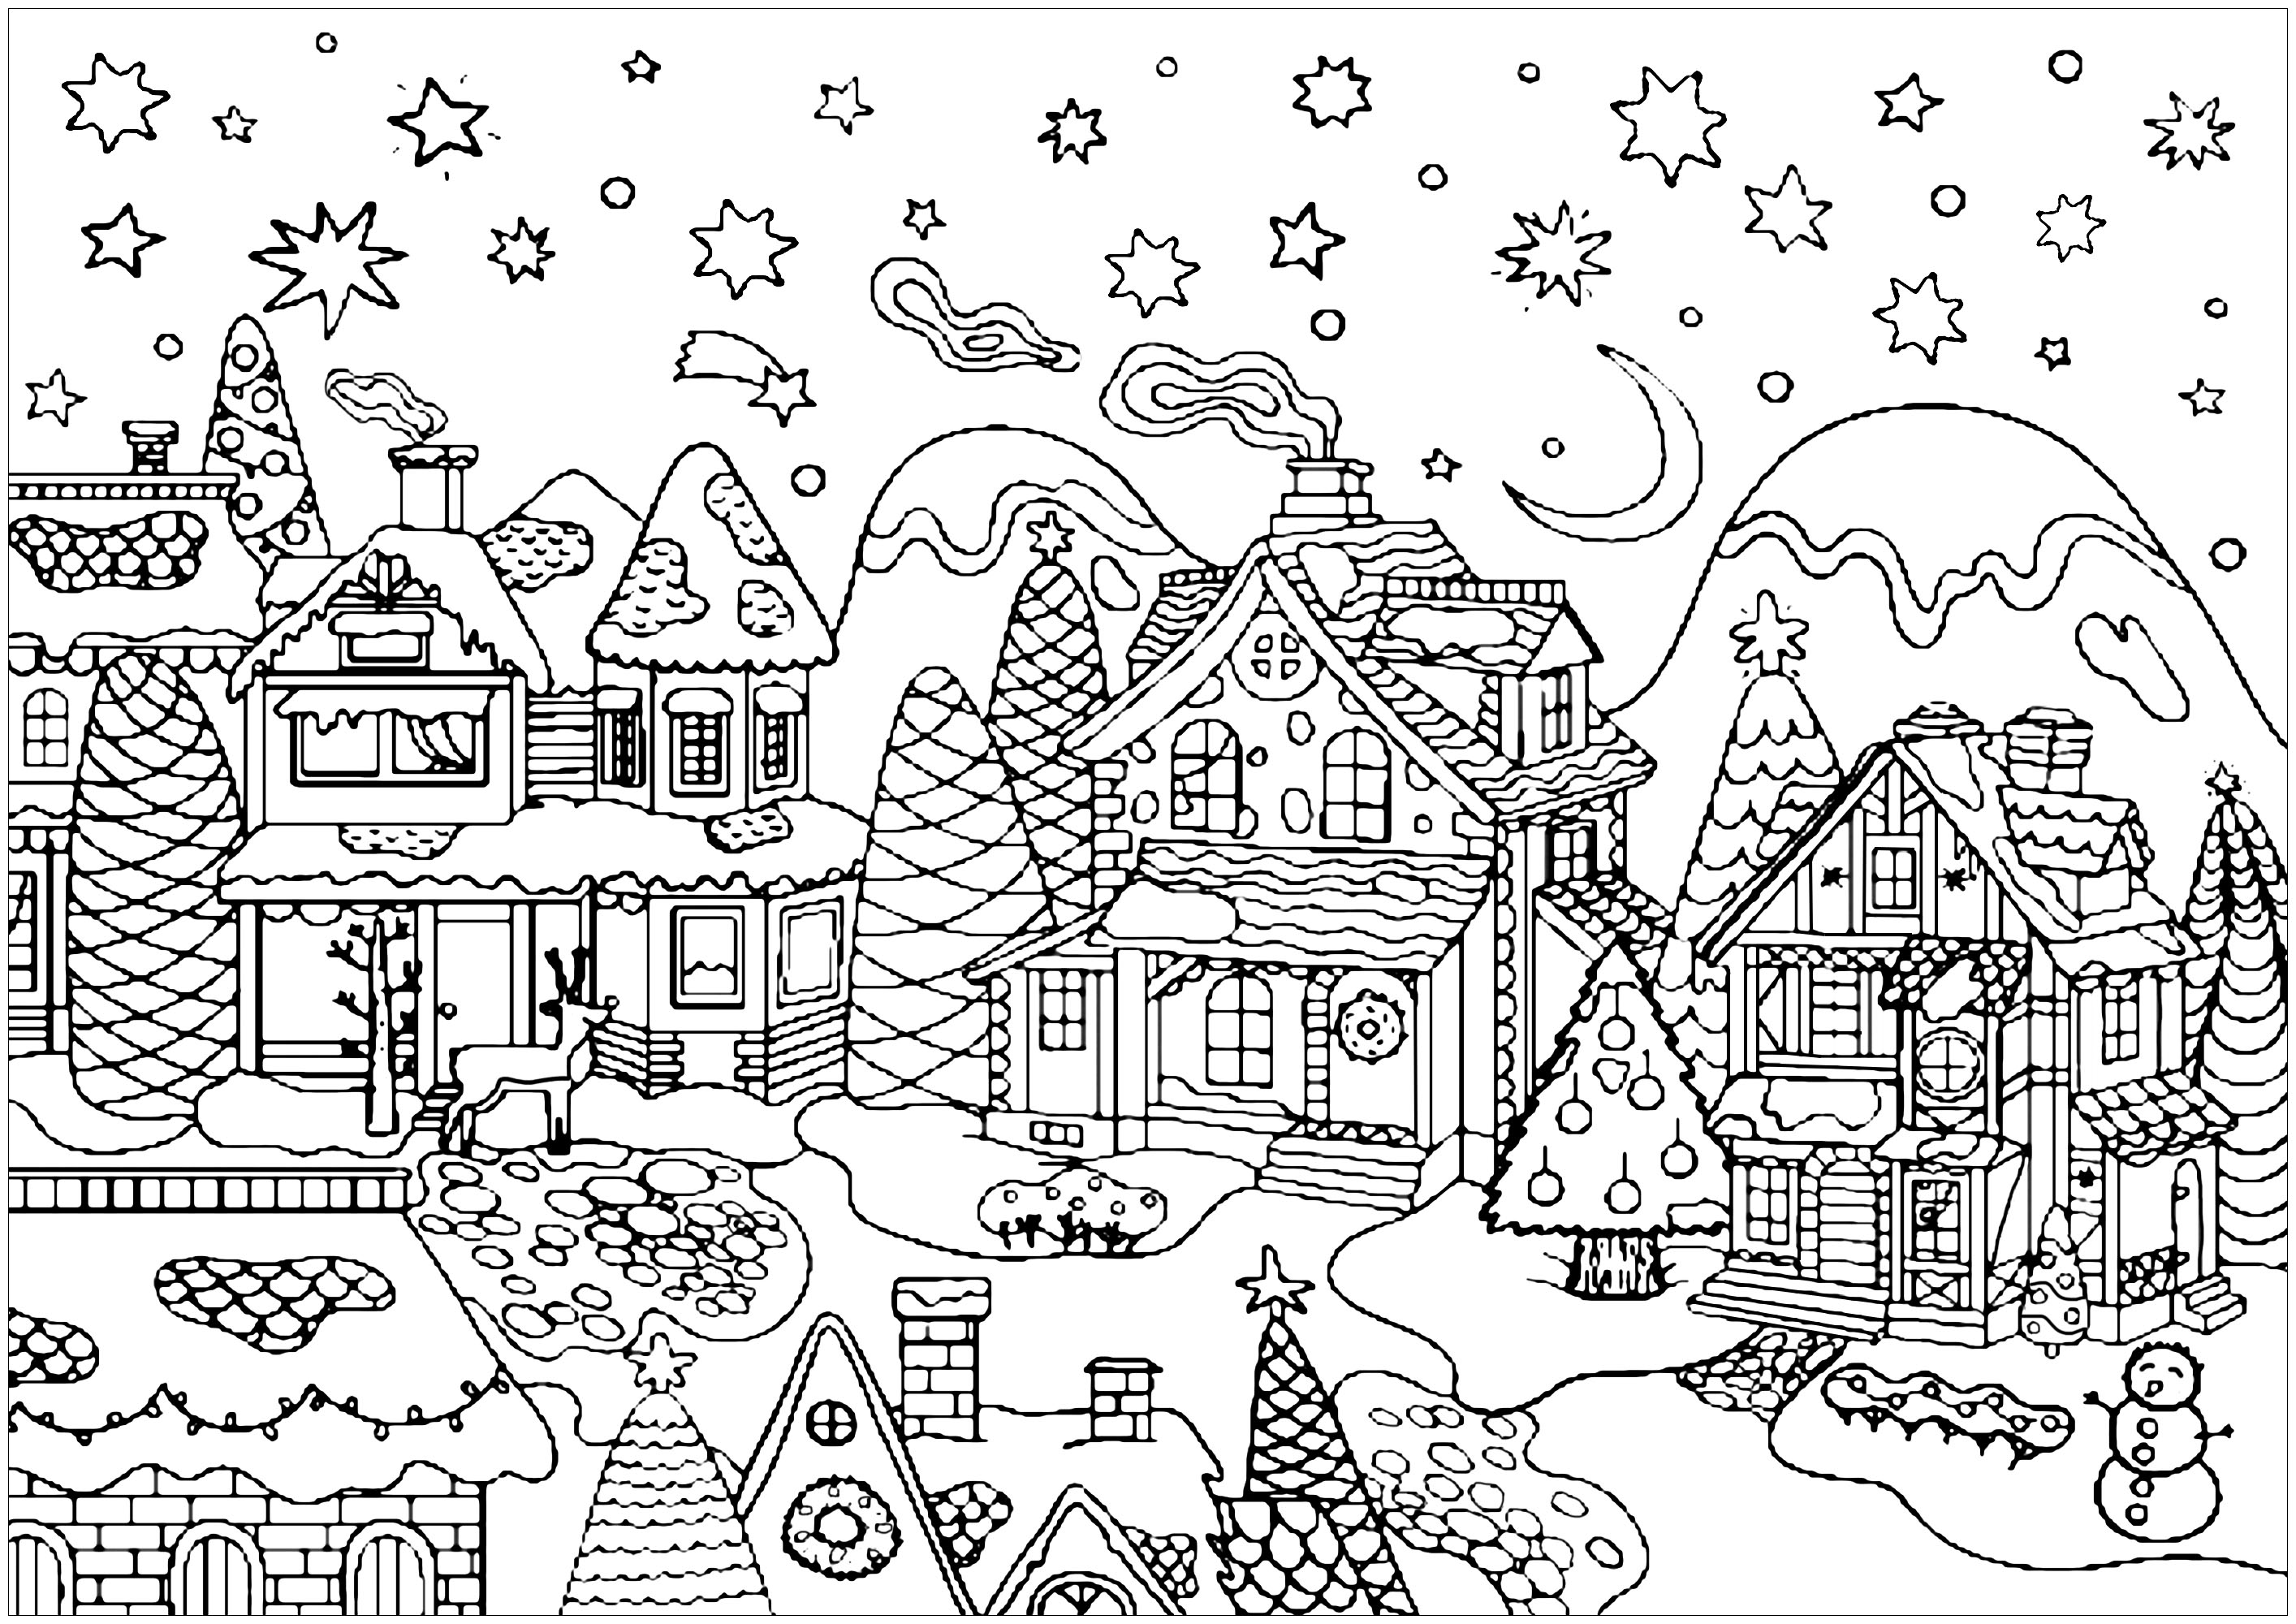 Color all the beautiful houses of this cute snowy village ready to celebrate Christmas